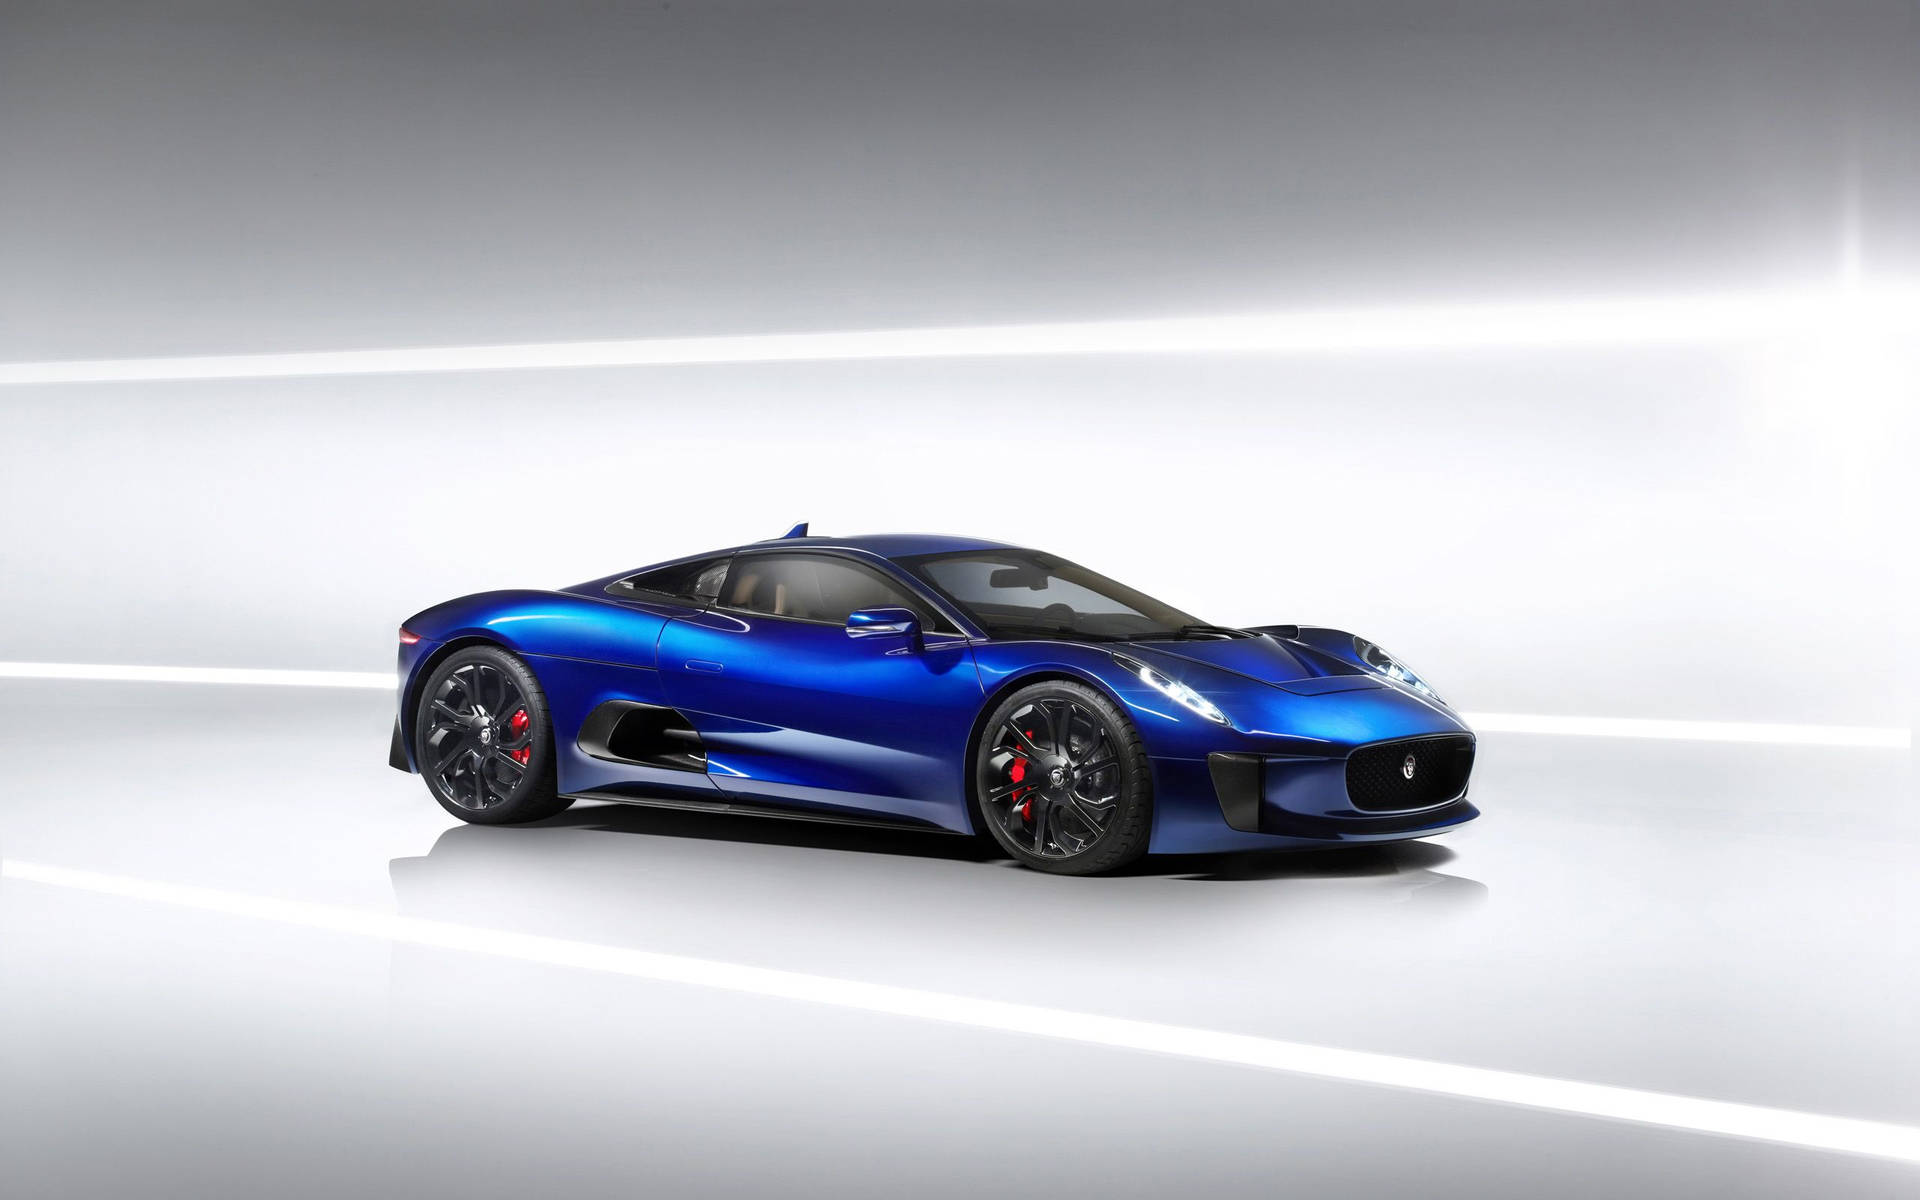 High Performance And Style On The Road In The Electric Blue Jaguar Background